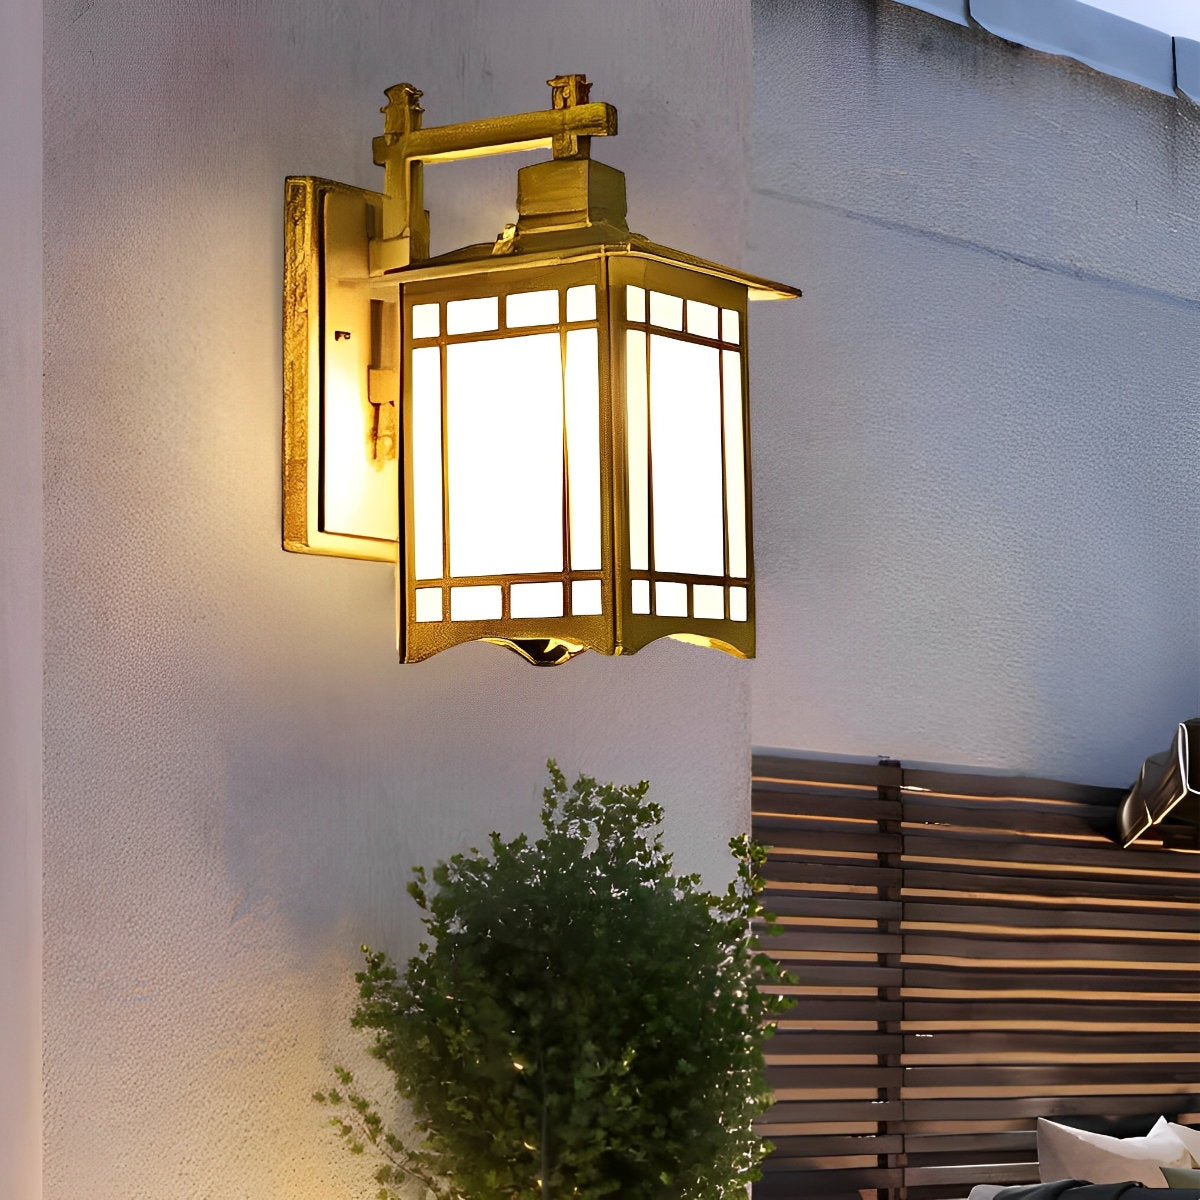 Retro Waterproof LED Vintage Solar Wall Lamp with Remote Wall Sconce Lighting - Flyachilles